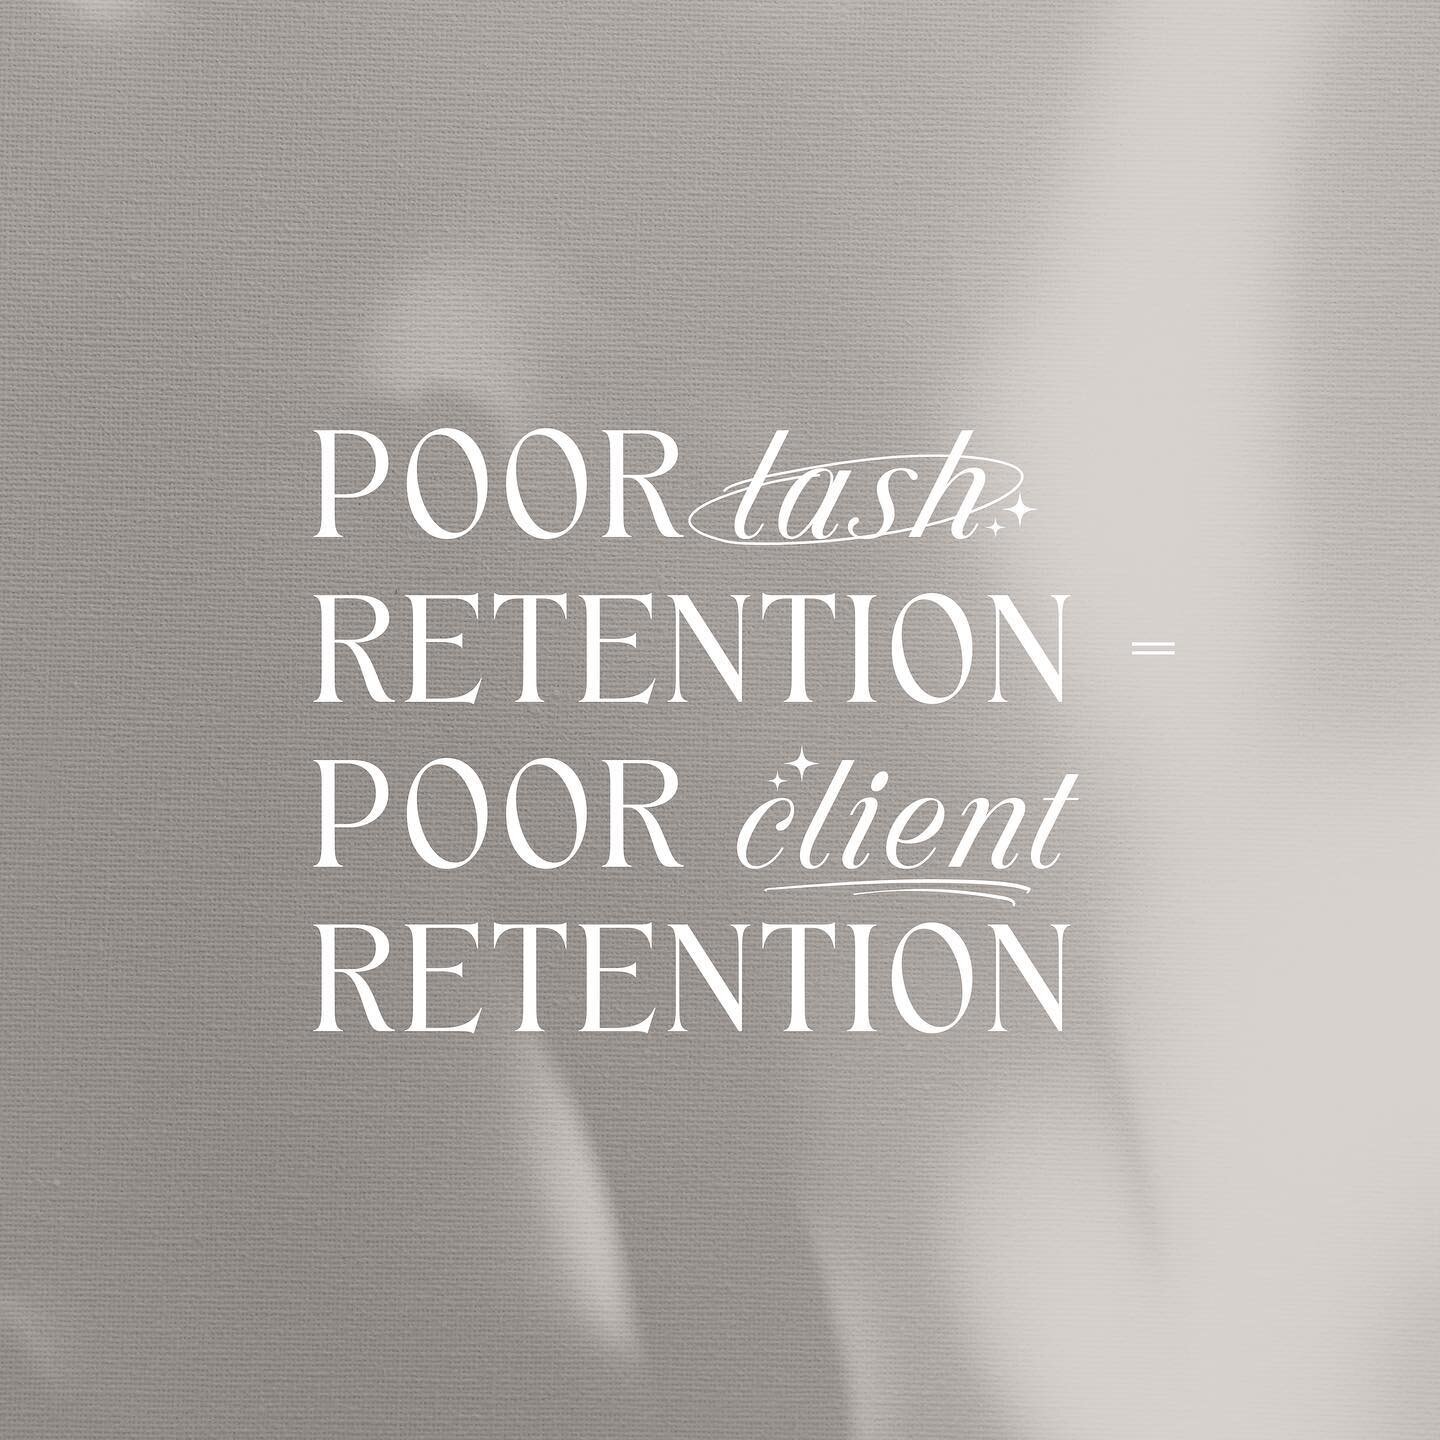 10 Lash Retention Tips &mdash; for stylists. I used to struggle so badly with retention and never understood why I couldn&rsquo;t keep clients to stay. Poor lash retention = poor client retention! No one wants to pay a heavy dime for lashes that won&